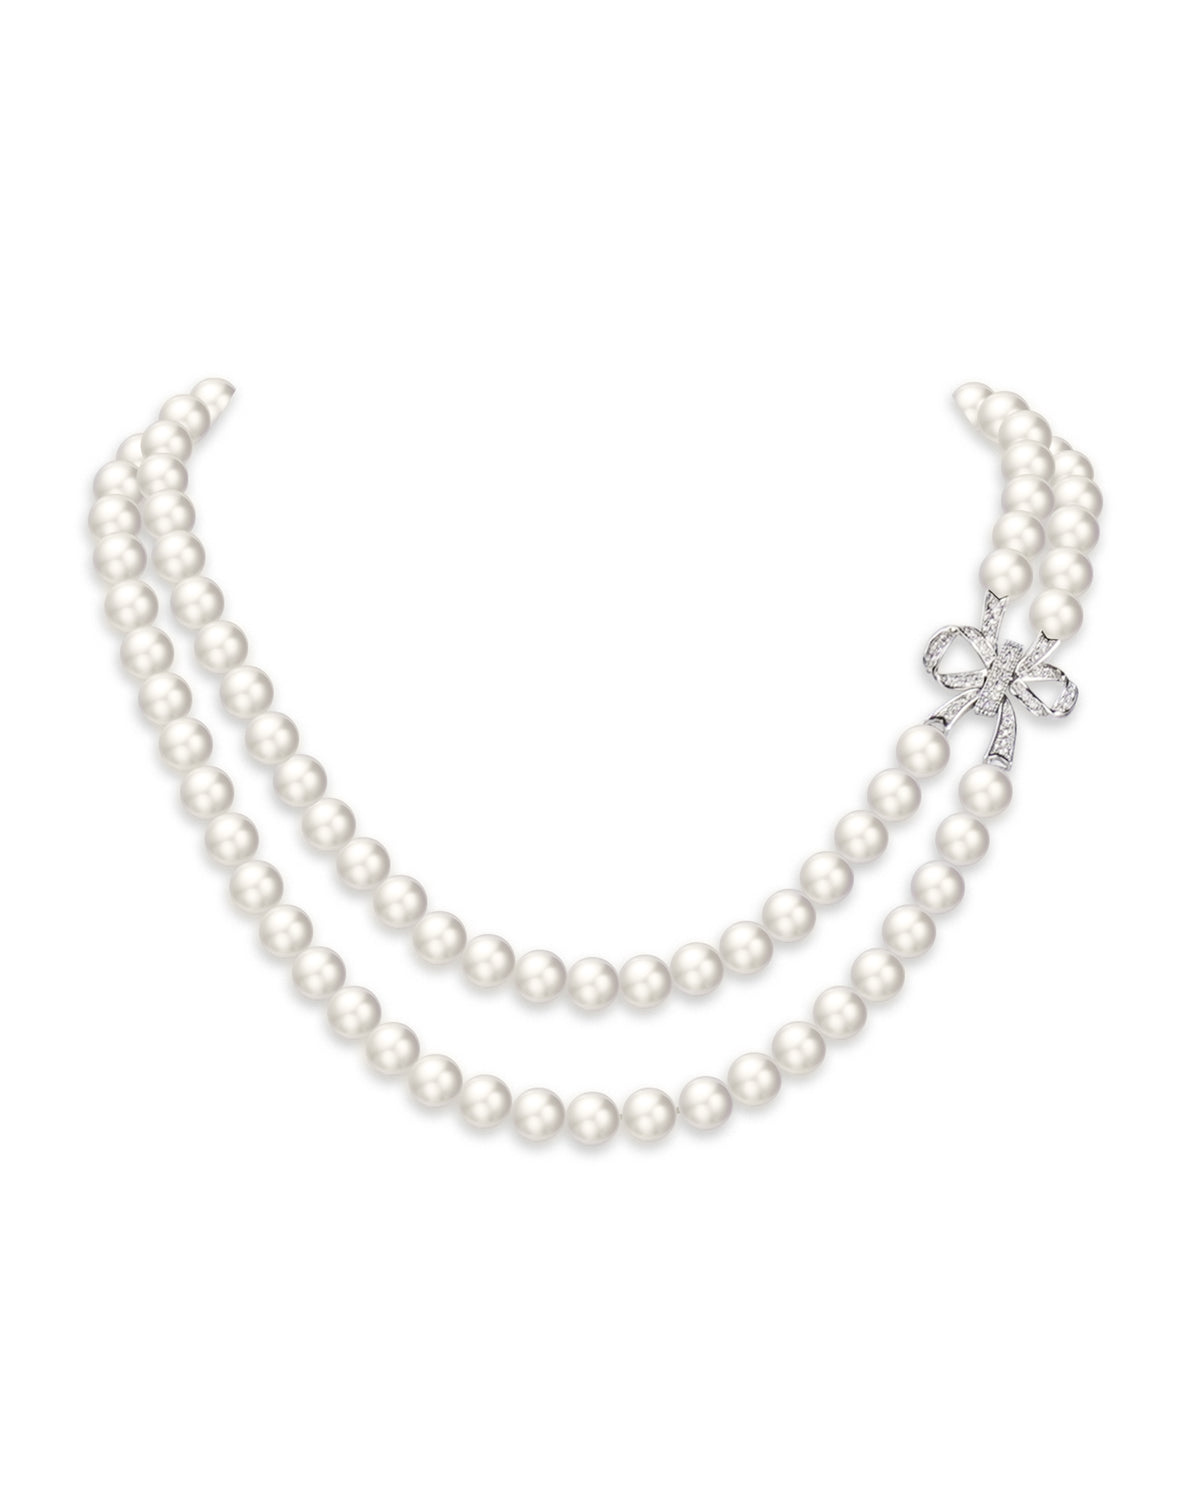 7-8mm White Freshwater Pearl Double Strand Necklace